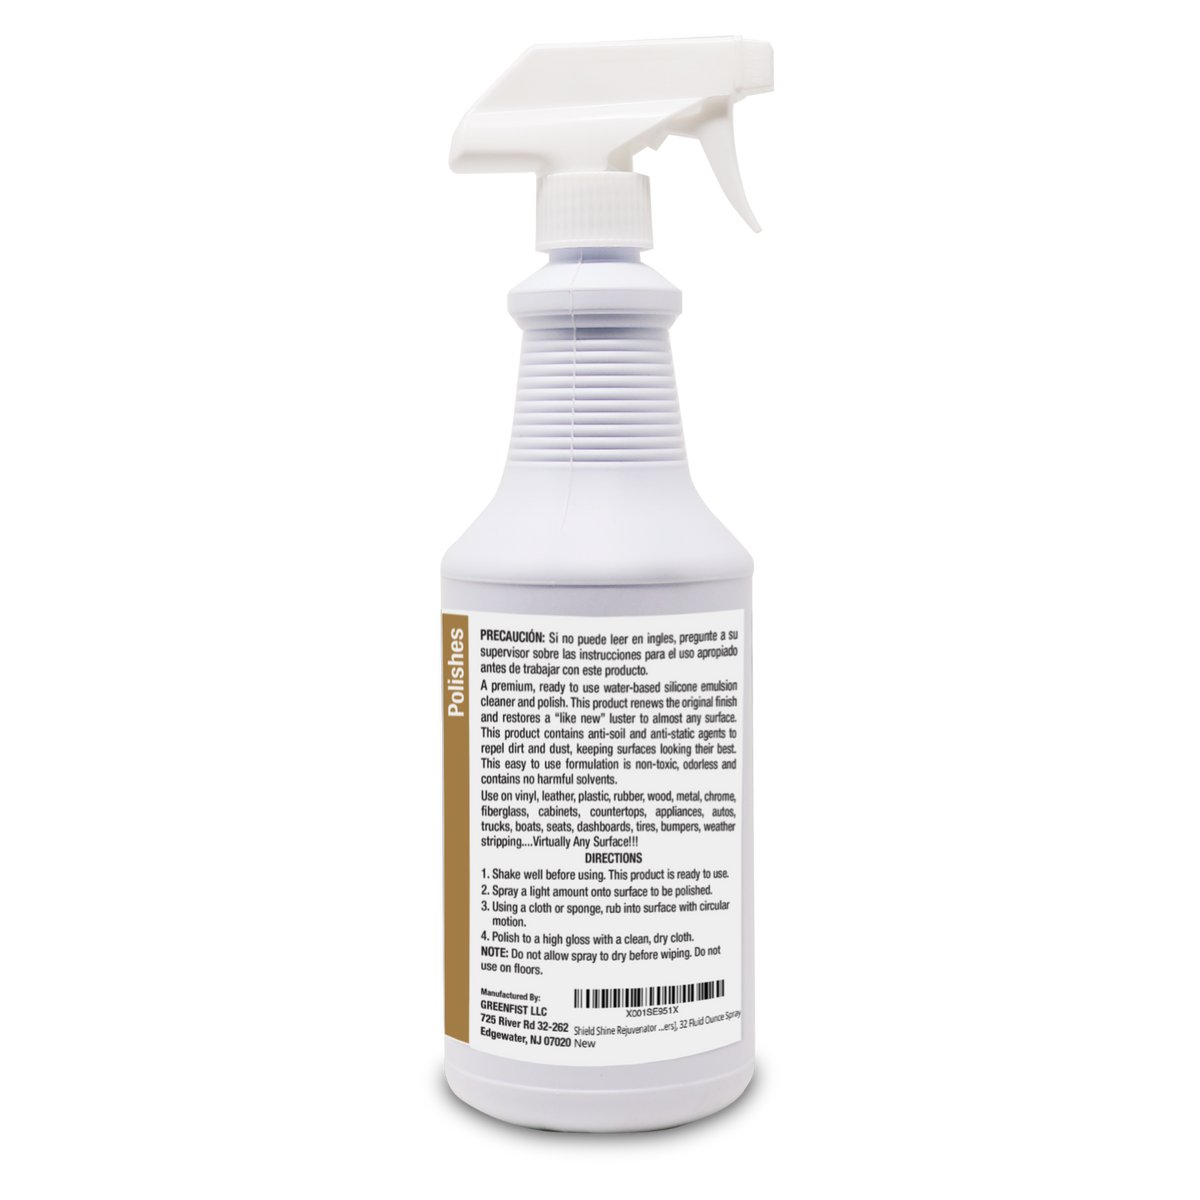 AutoGeneral Ultimate Aluminum Cleaner & Brightener - Non-Etching, High Shine Polisher for Vehicle and Equipment - Removes Grease & Oxidation - Spray